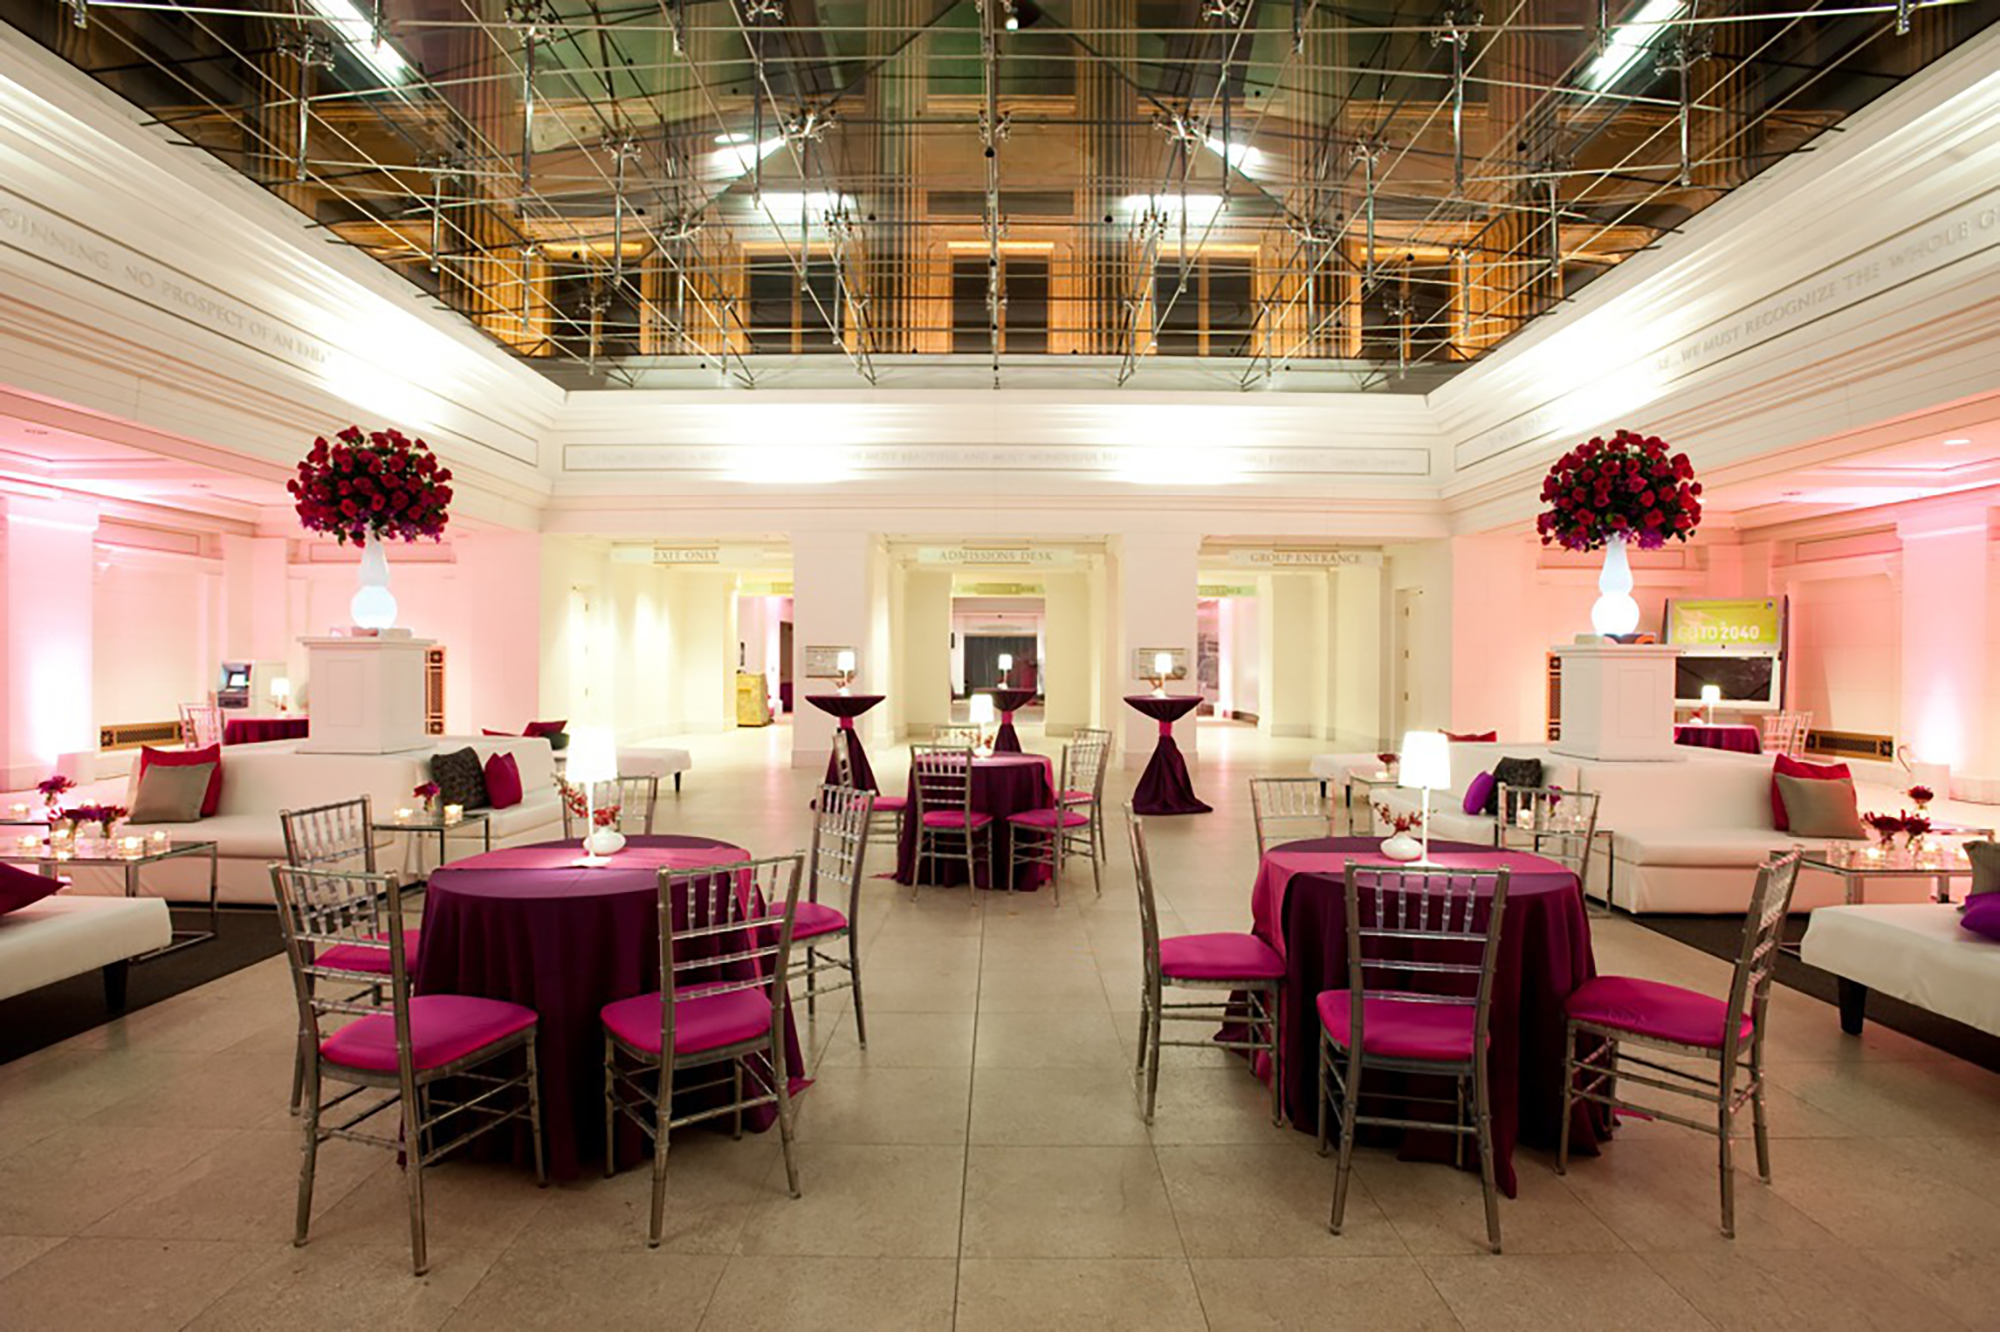 East Atrium space set up for an event with tall cocktail tables, small tables with five chairs eat, and white couches. Floral arrangements sit on while pillars behind the couches. A glass ceiling reveals the east facade of the Field Museum at night.